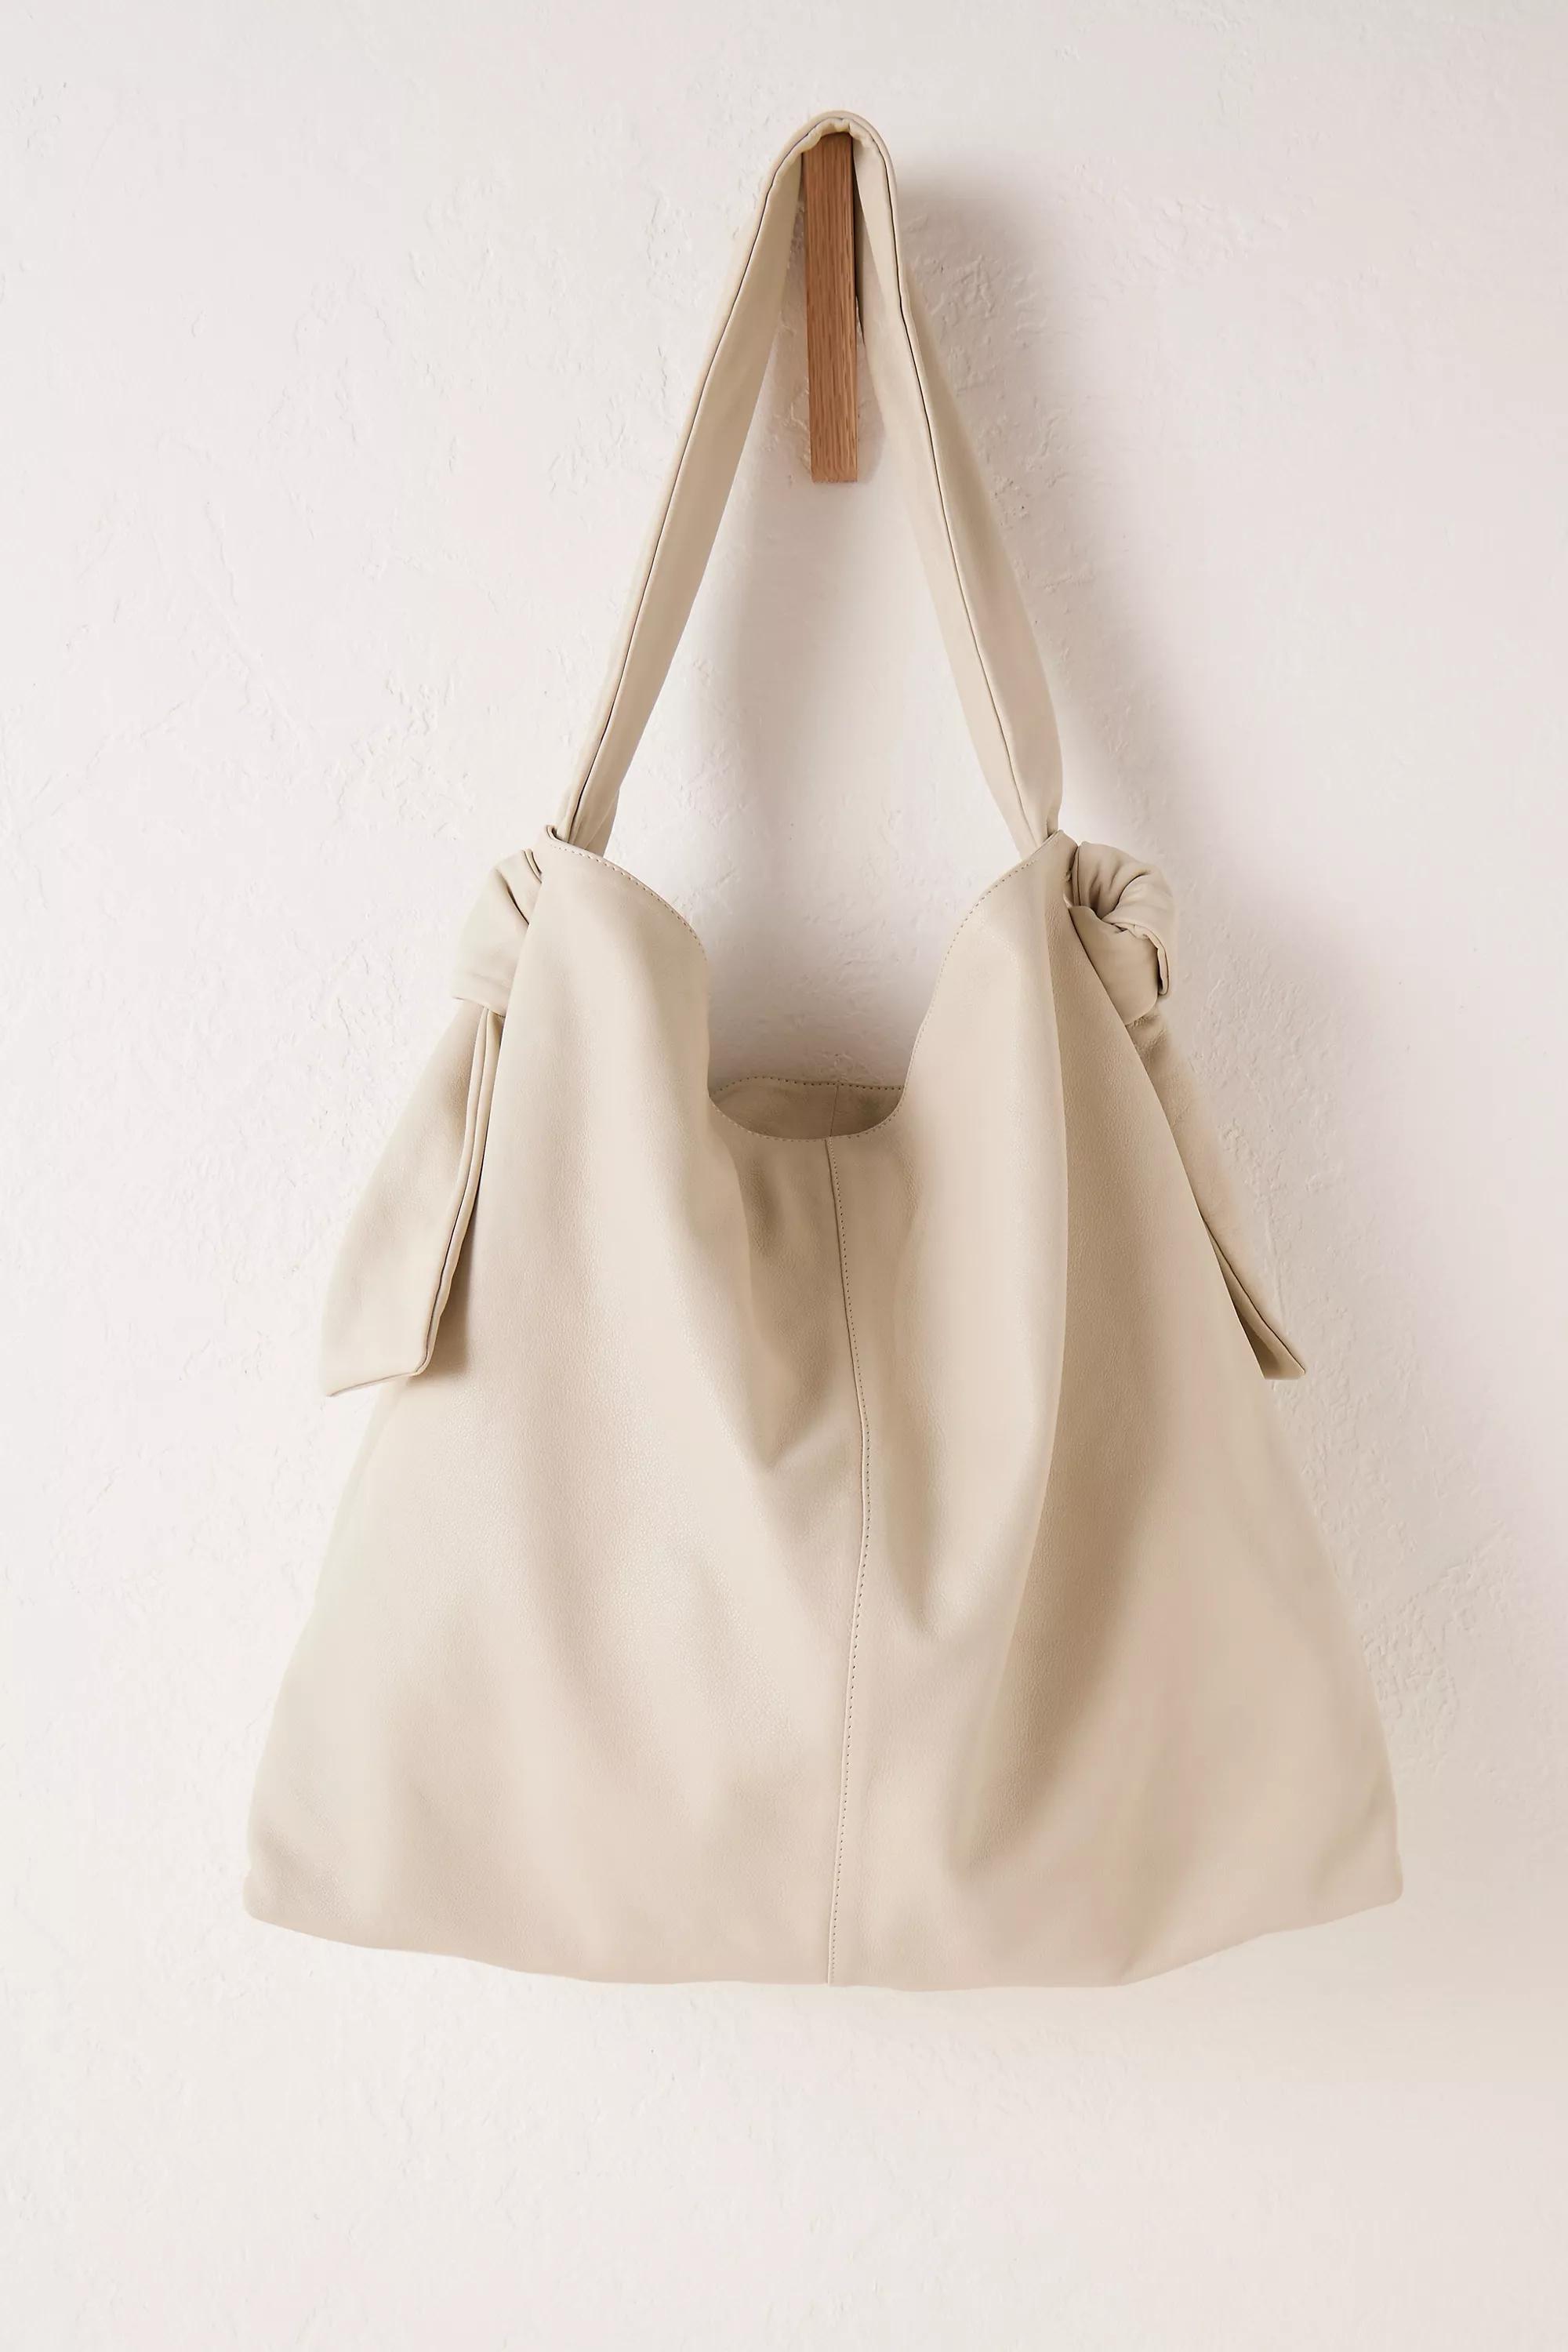 Anthropologie - Knotted Leather Slouchy Tote Bag, BEIGE